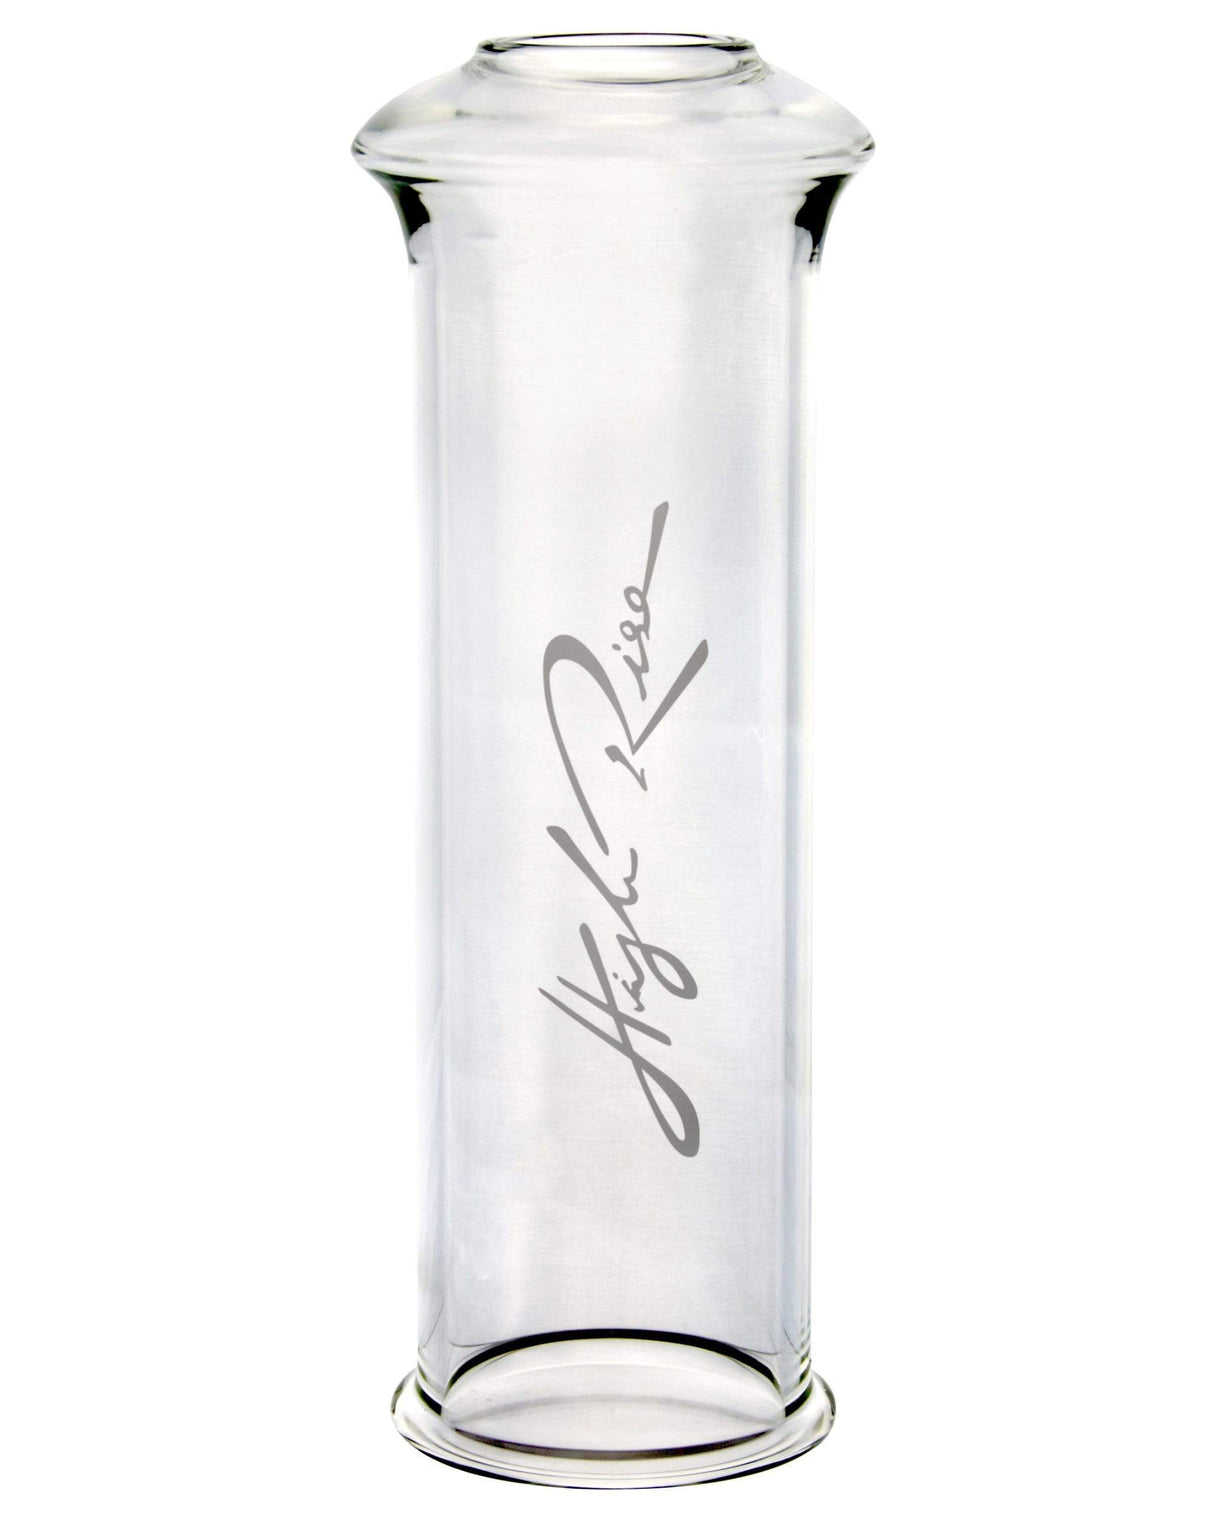 The High Rise Gravity Bong by HighRise, clear borosilicate glass with signature, front view